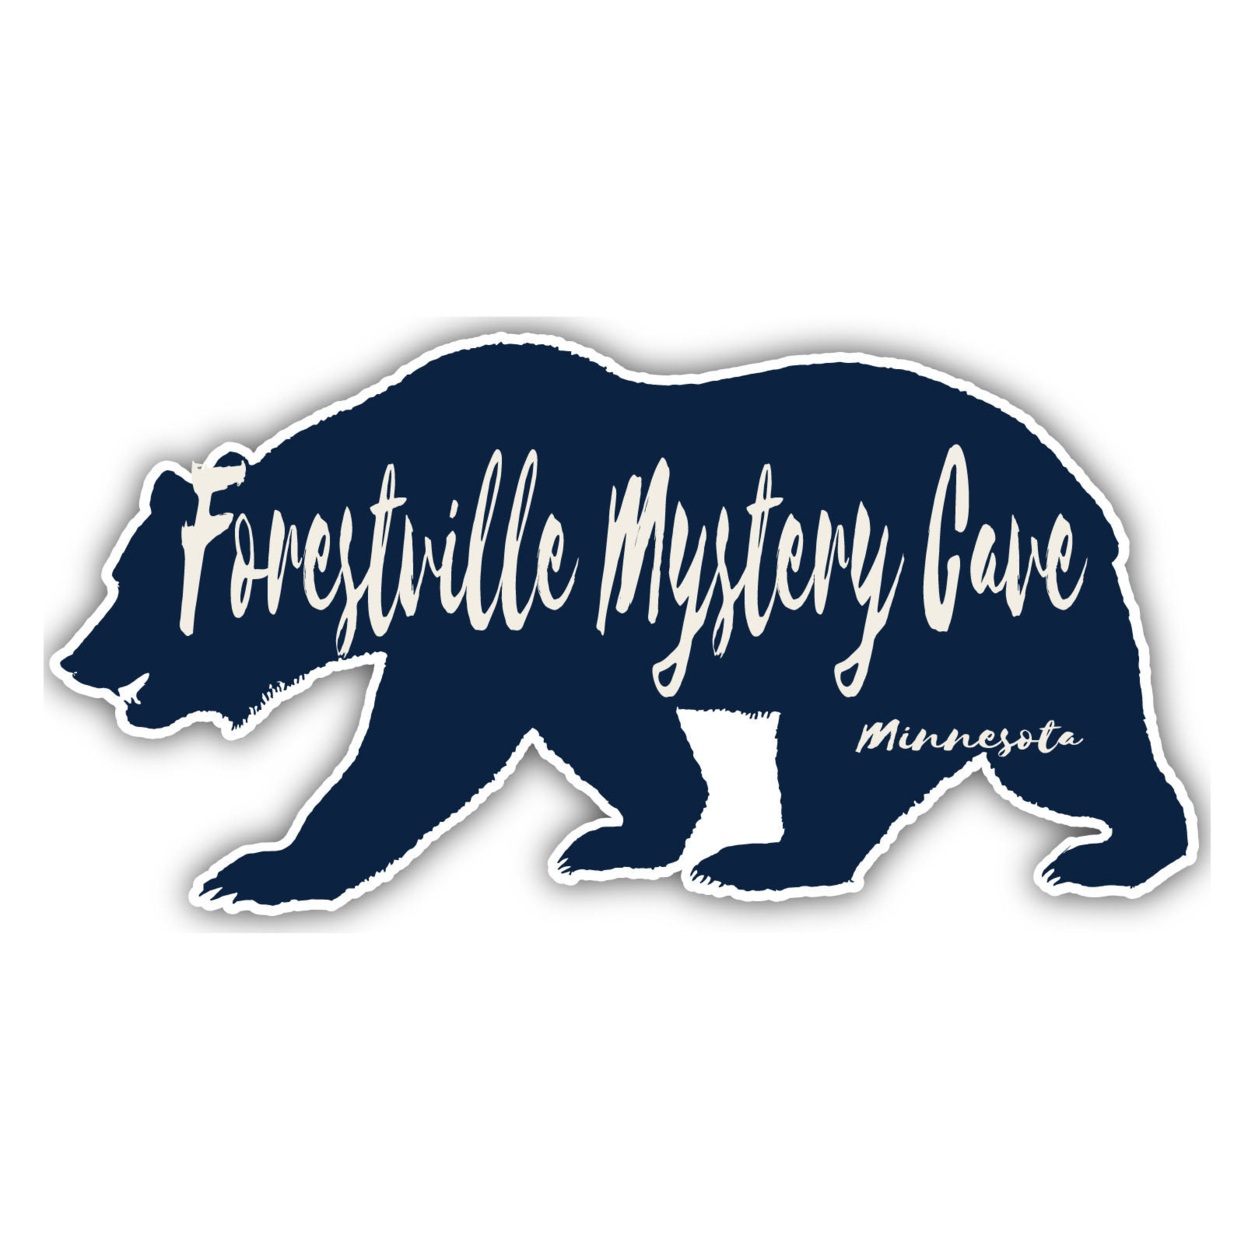 Forestville Mystery Cave Minnesota Souvenir Decorative Stickers (Choose Theme And Size) - 4-Pack, 8-Inch, Bear